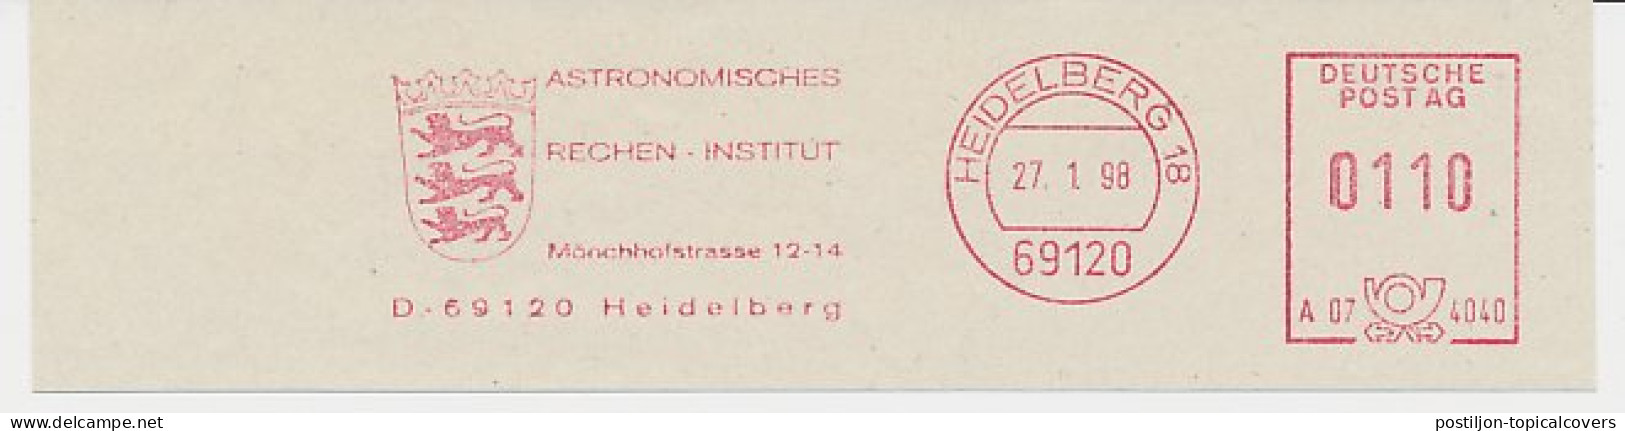 Meter Cut Germany 1998 Astronomical Calculation Institute - Astronomia